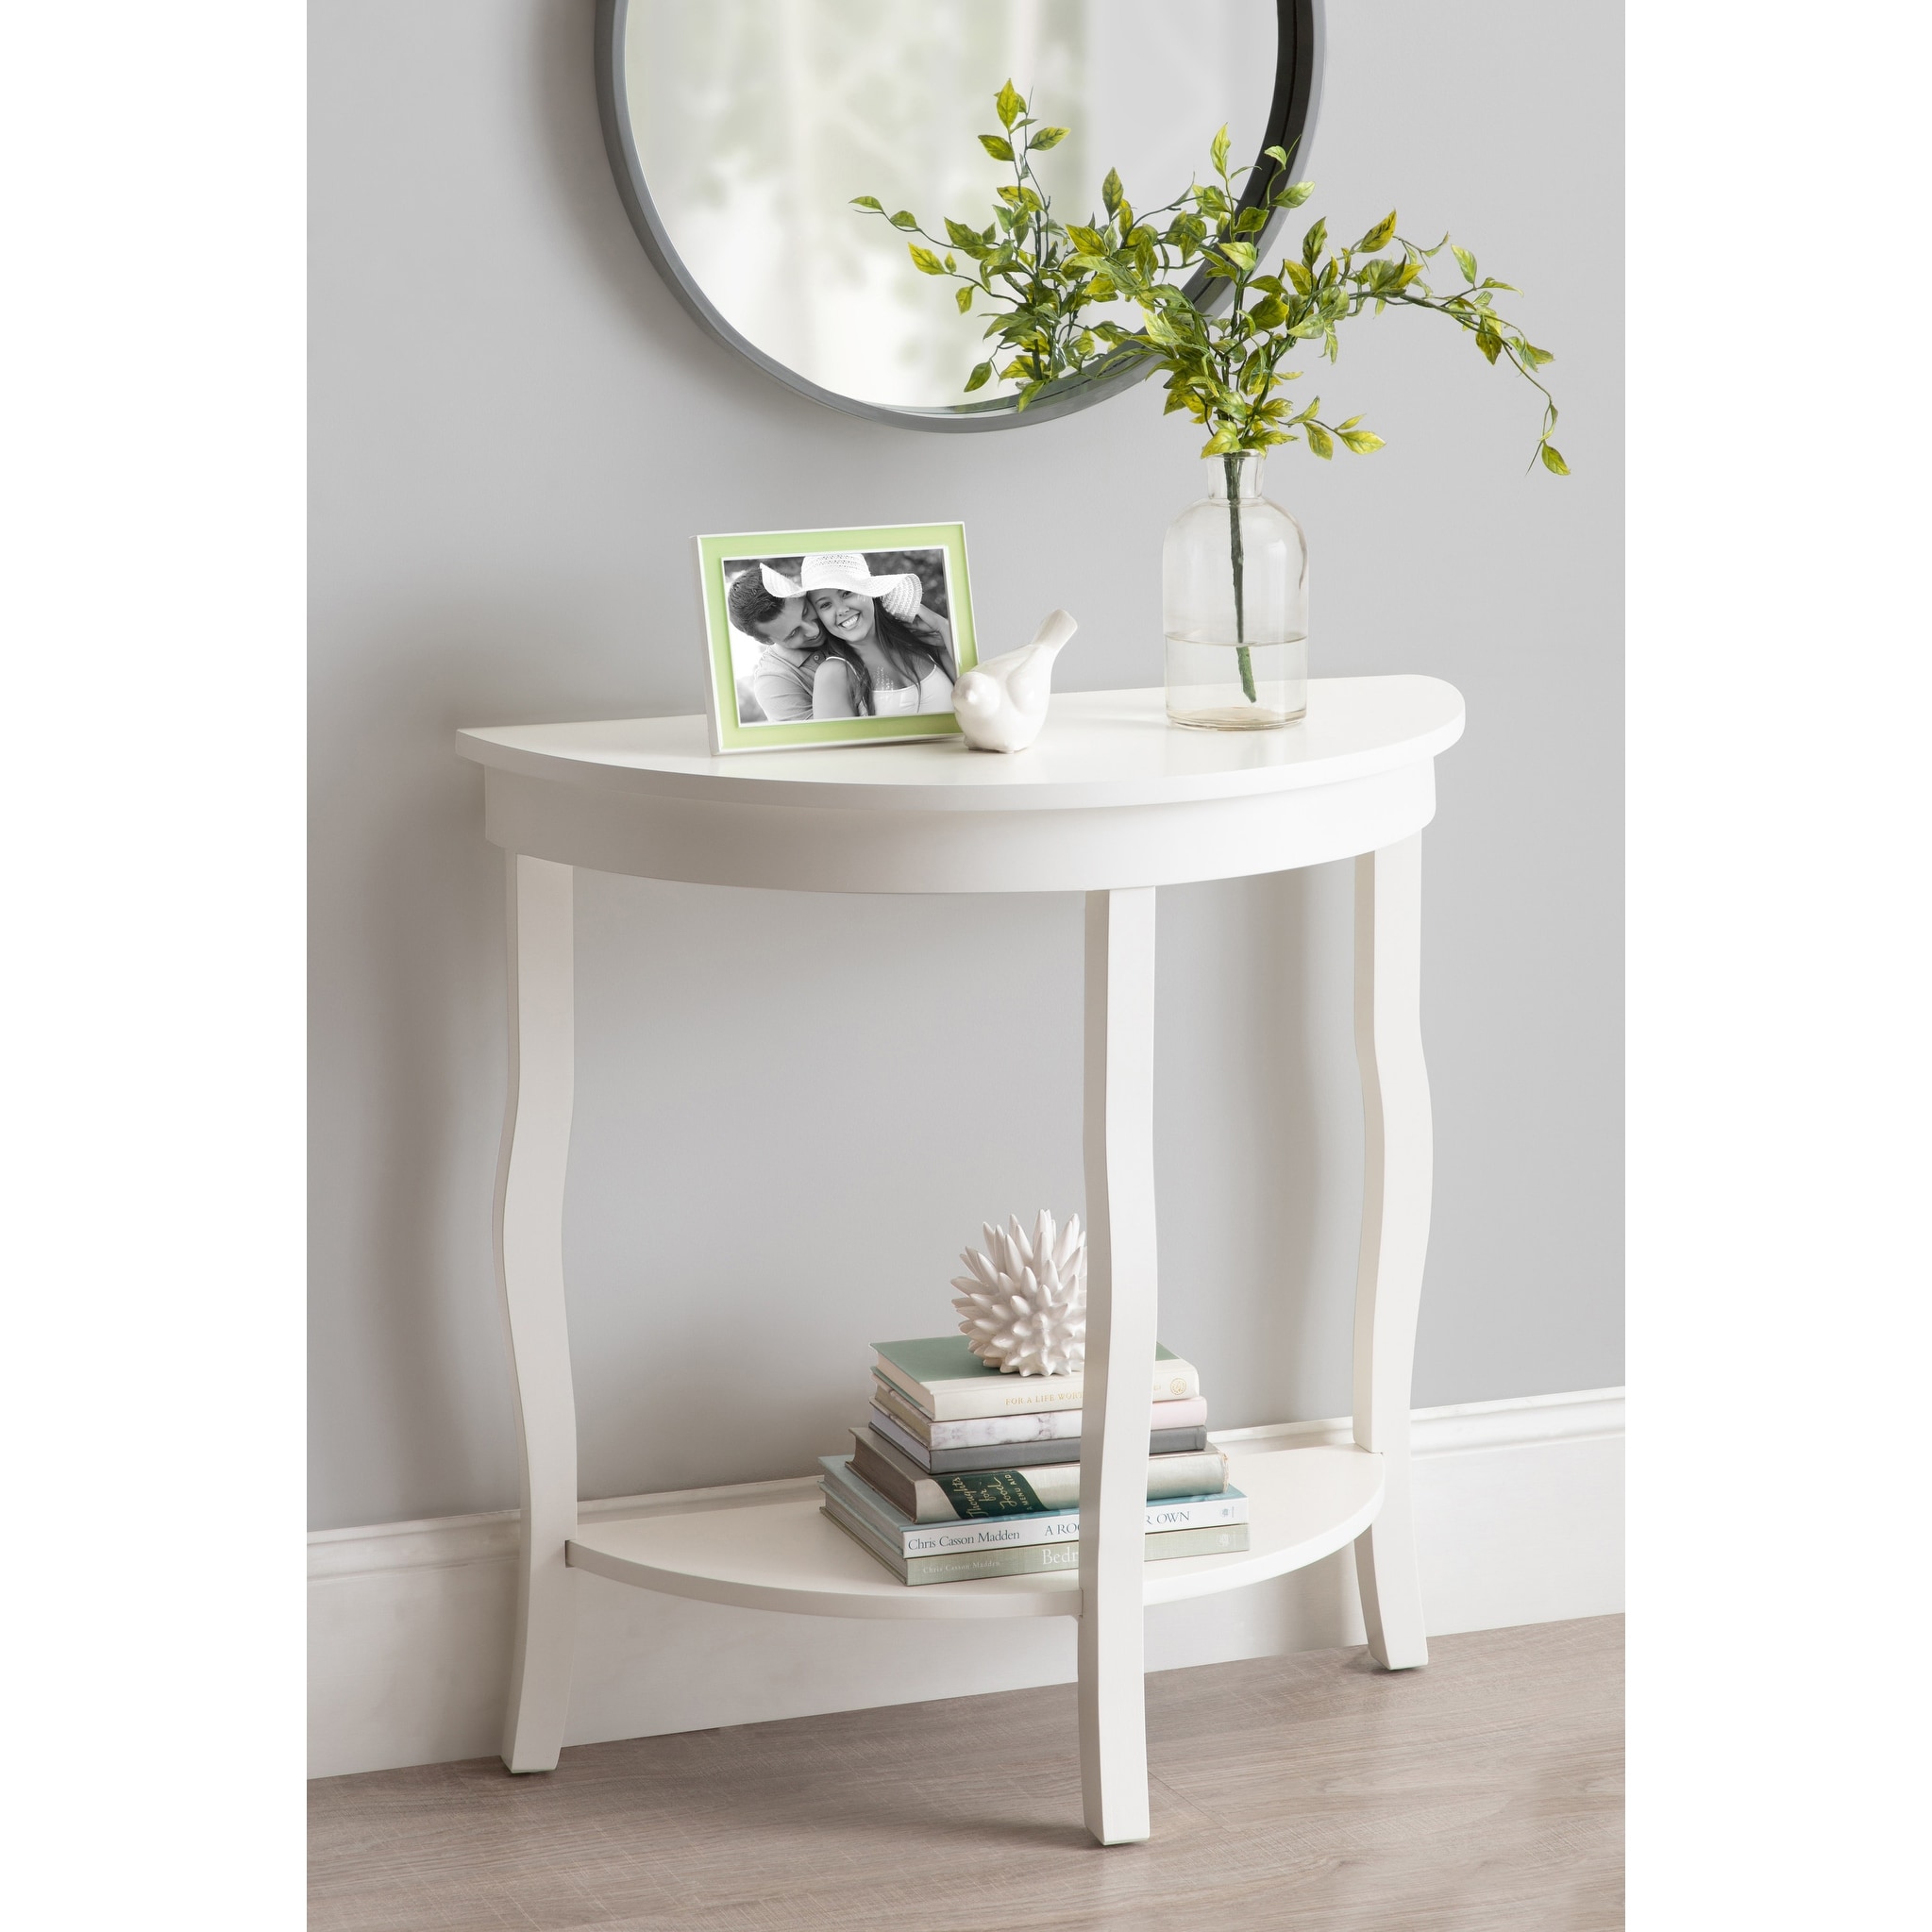 Kate and Laurel Lillian Wood Half Moon Console Table Curved Legs with Shelf Black